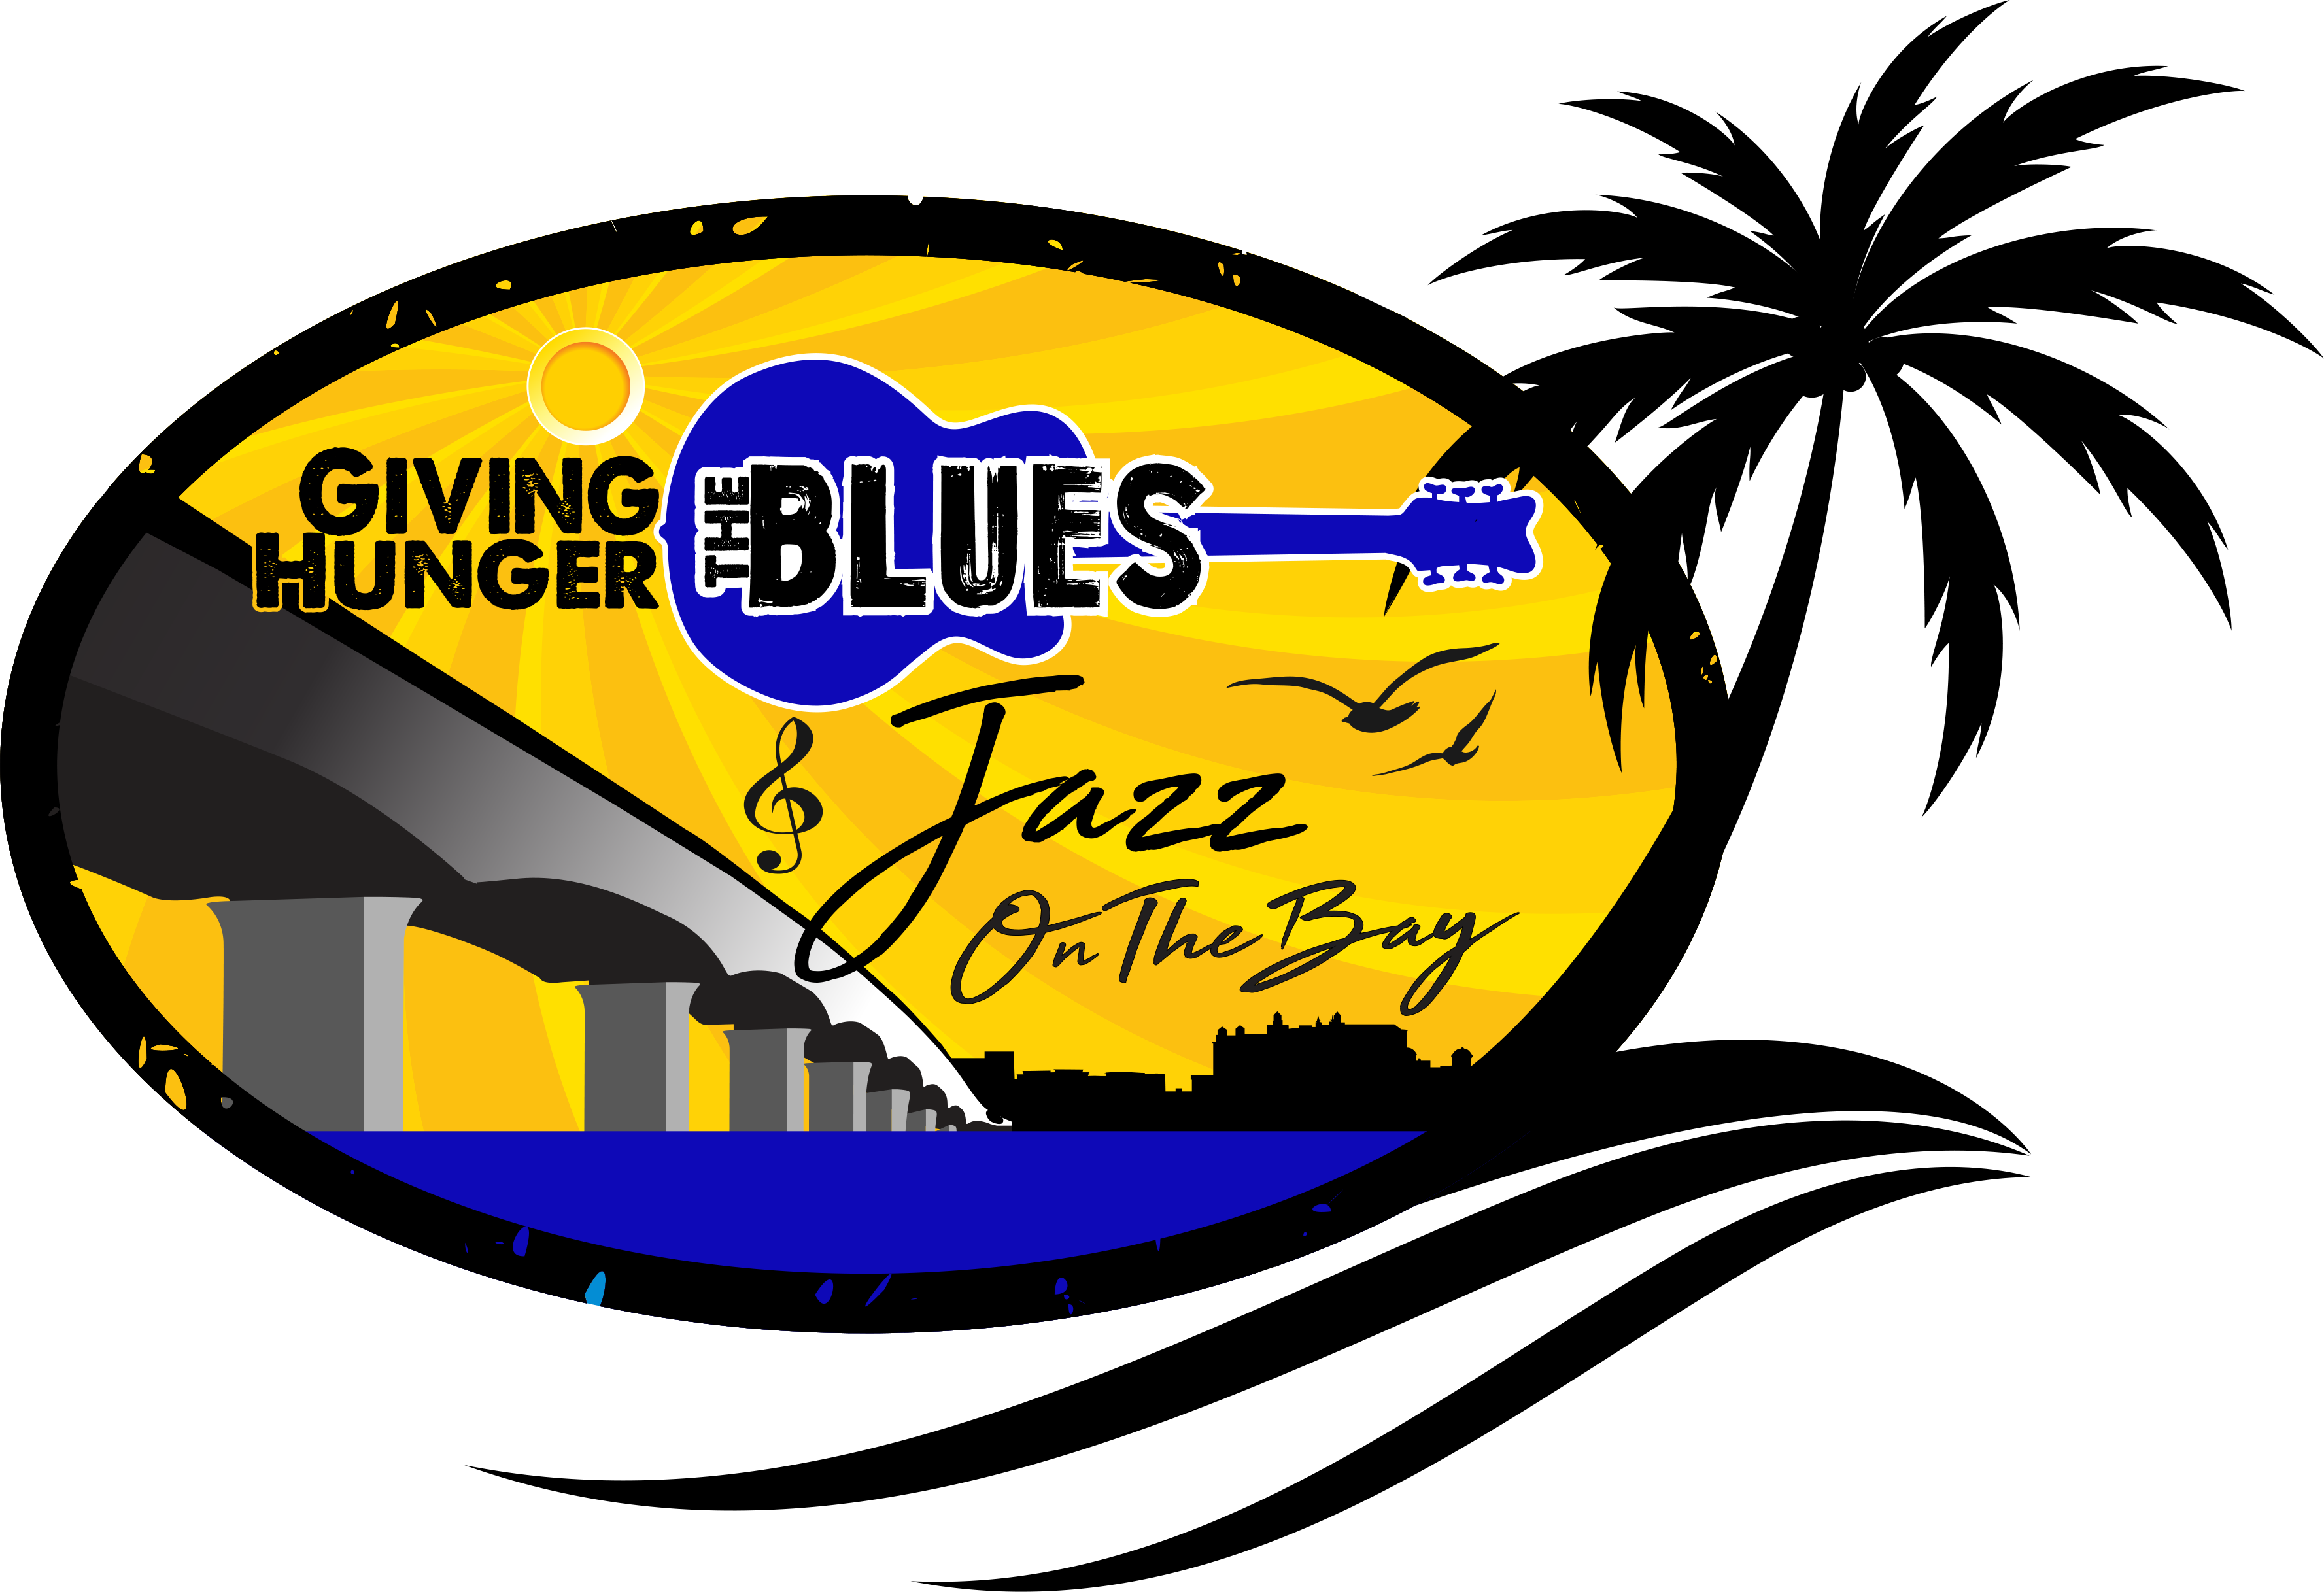 Giving Hunger The Blues And Jazz On The Bay Music Festival - Gulf Coast Mobile Grooming (3554x2435)